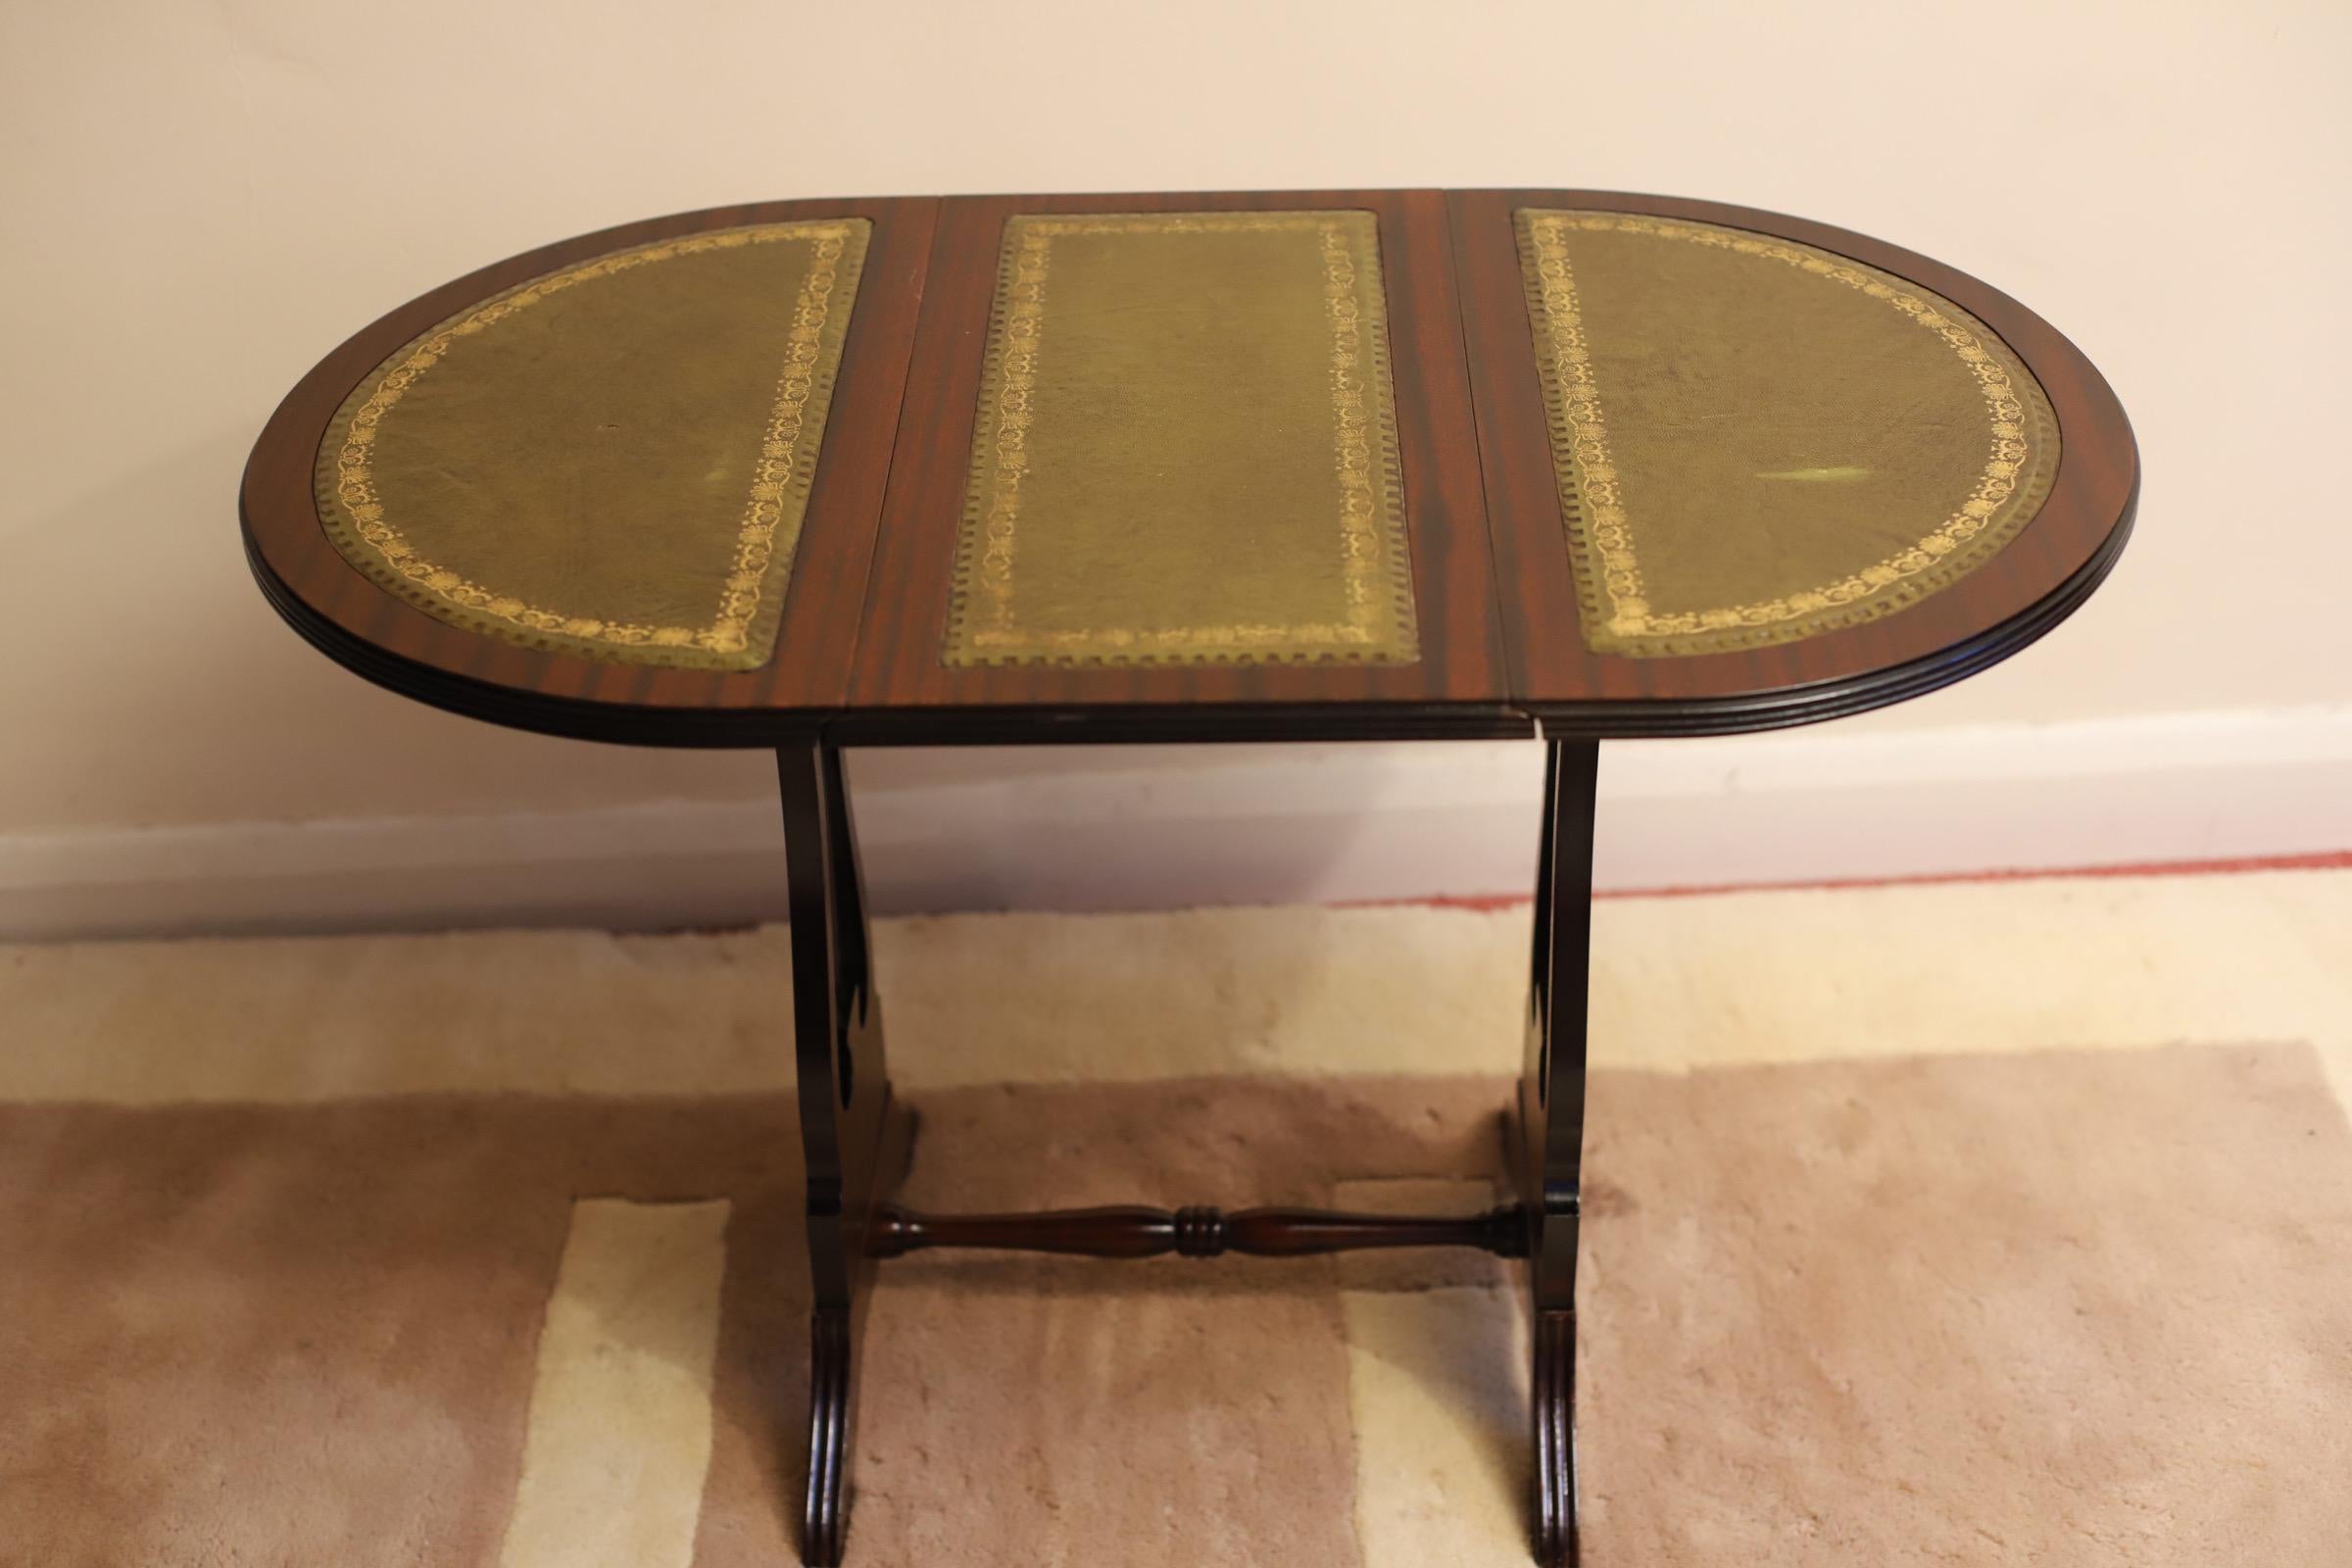 Beautiful Oval Folding Caffe Table With Leather Top and swivel action top , this table is in perfect condition for the age it has been clean and polished .


Don't hesitate to contact me if you have any questions.


Please have a closer look